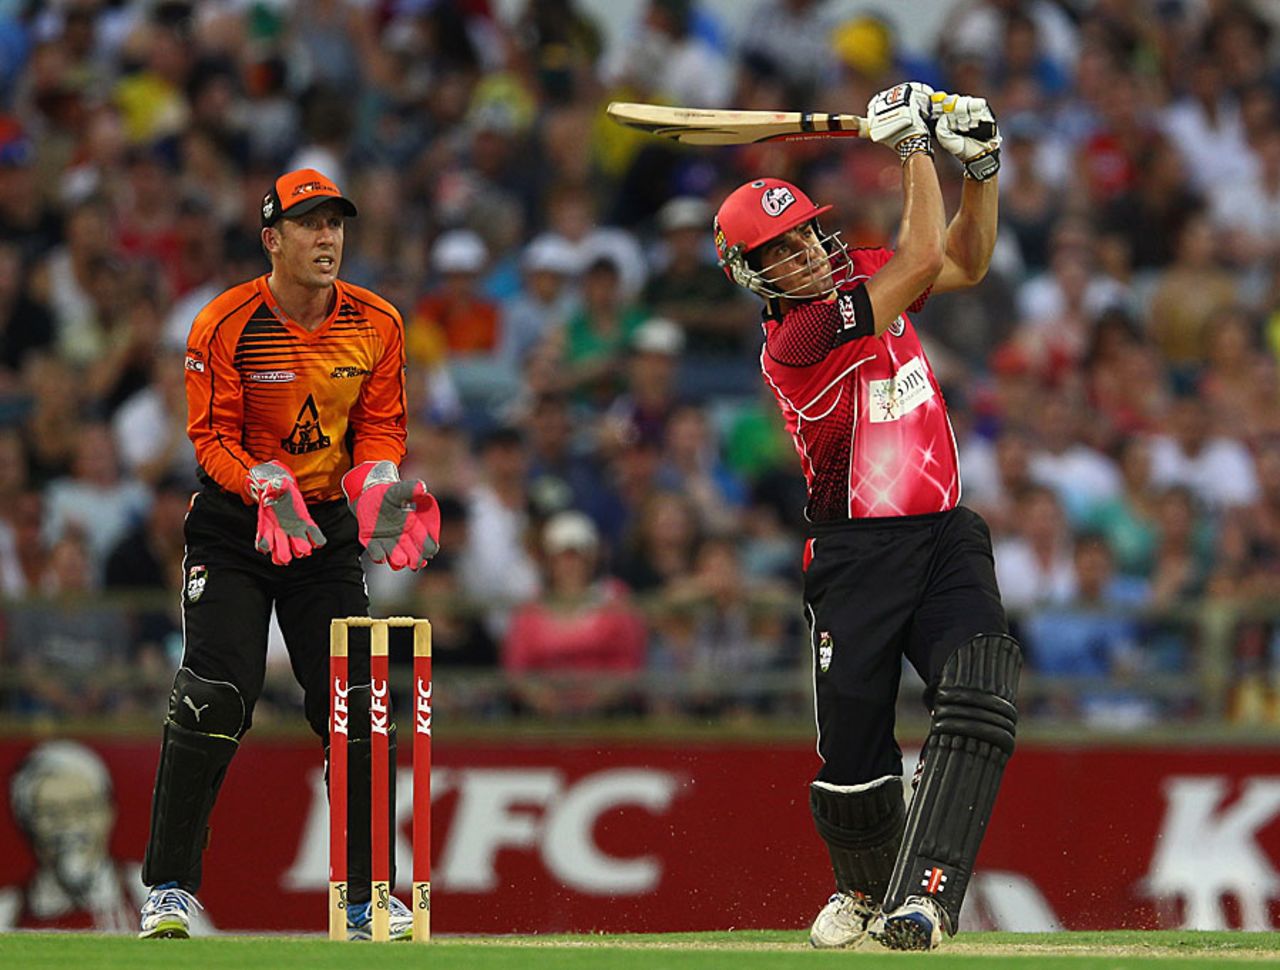 Moises Henriques scored a quick half-century to set up the chase, Perth Scorchers v Sydney Sixers, BBL 2011-12 final, Perth, January 28, 2012 